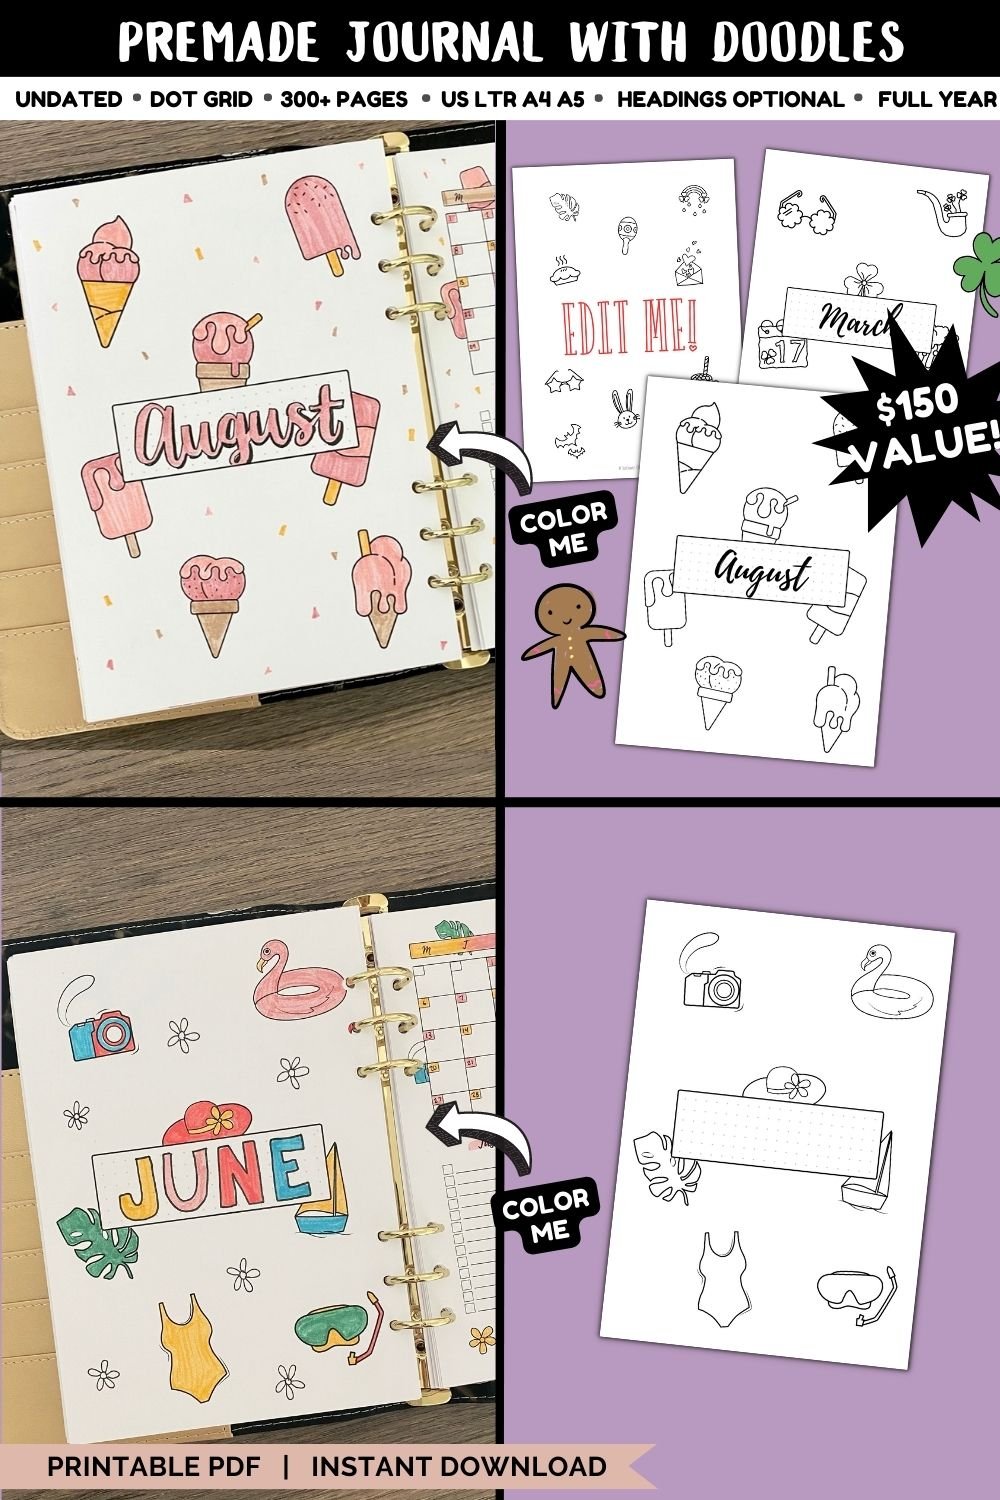 Creative Premade Bullet Journal Ideas for Easy Planning